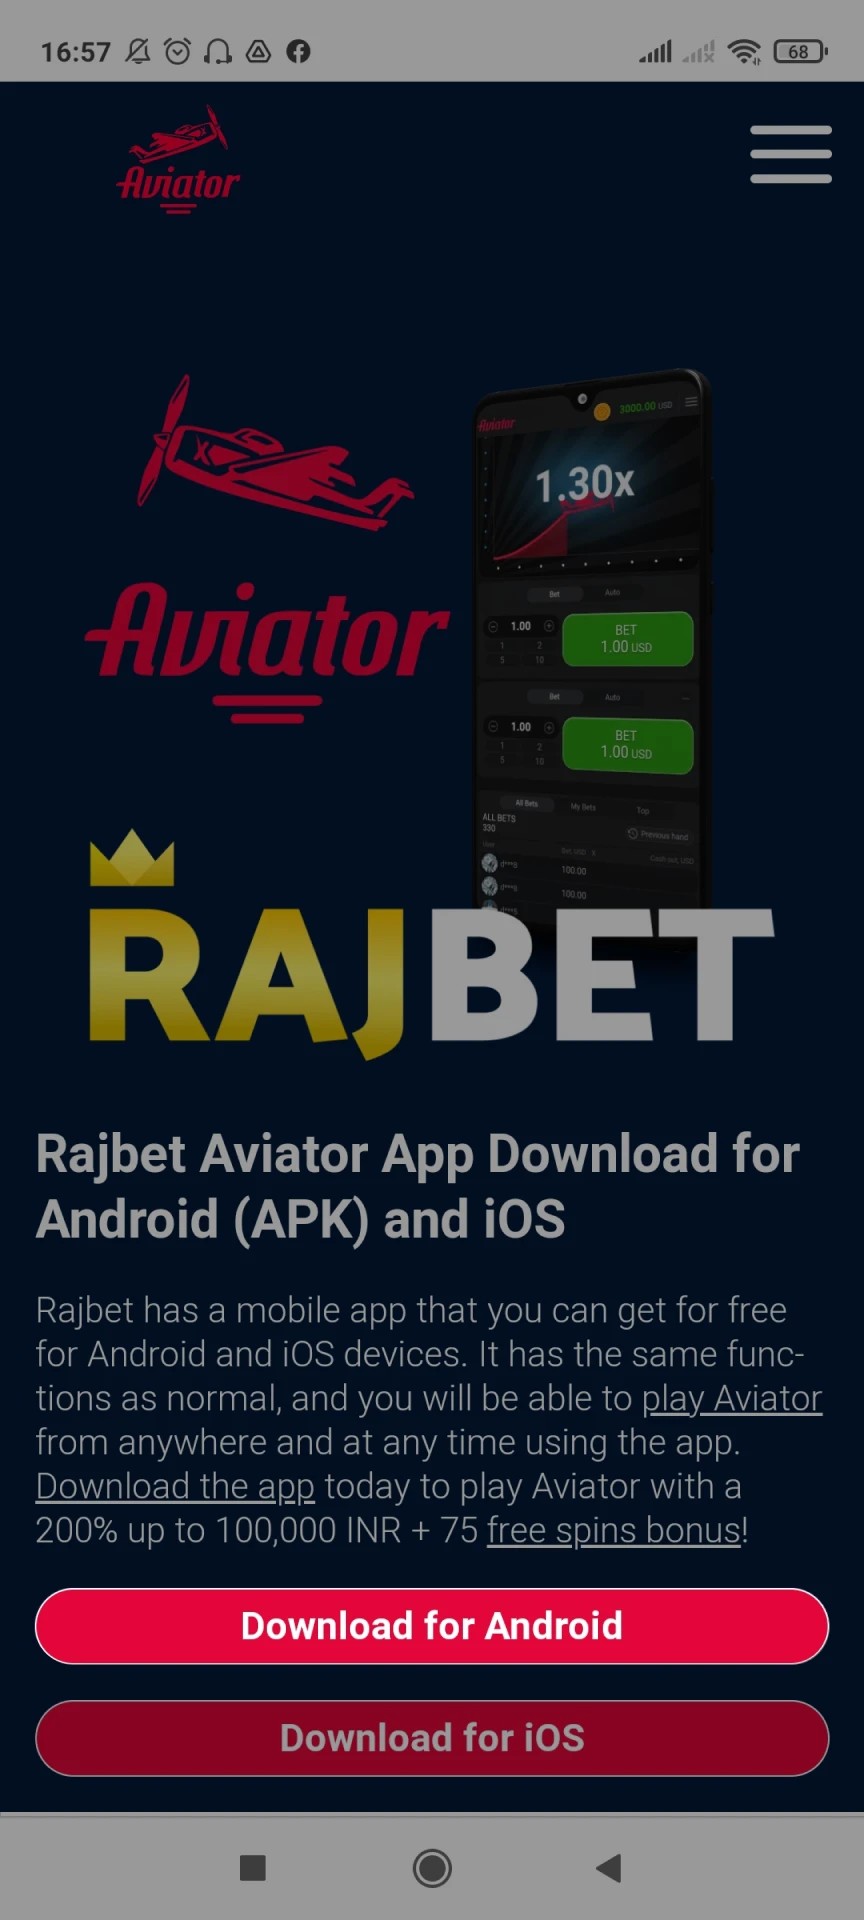 Go to the Rajbet homepage to download the app for Android.